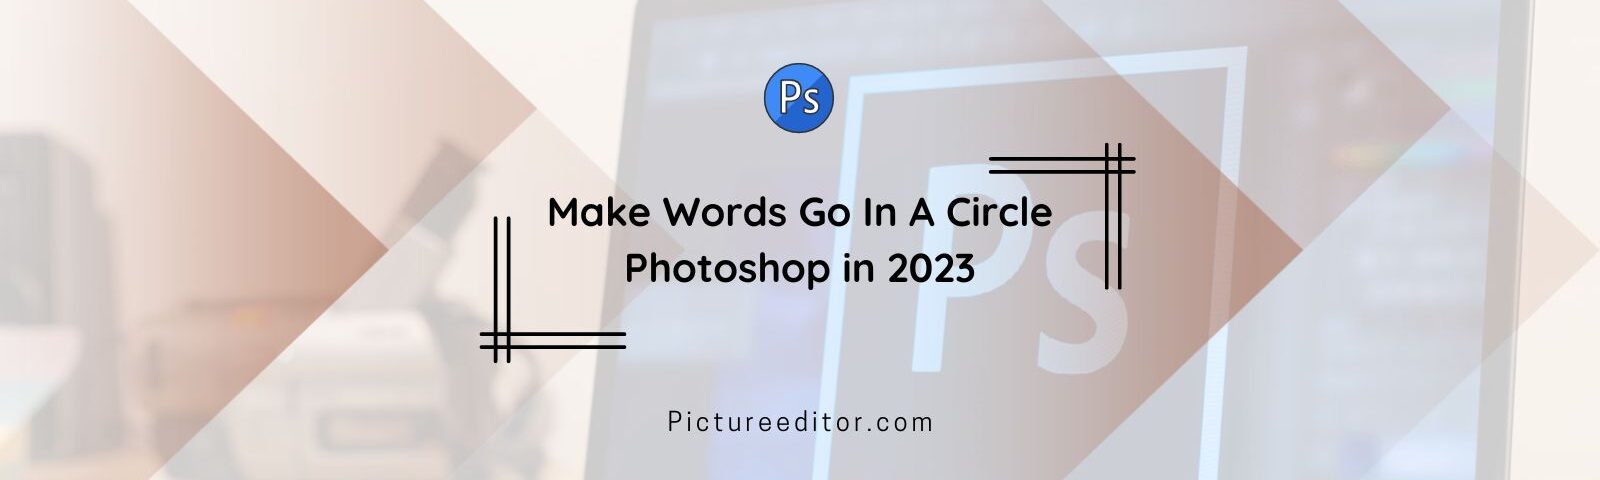 Make Words Go In A Circle Photoshop in 2023